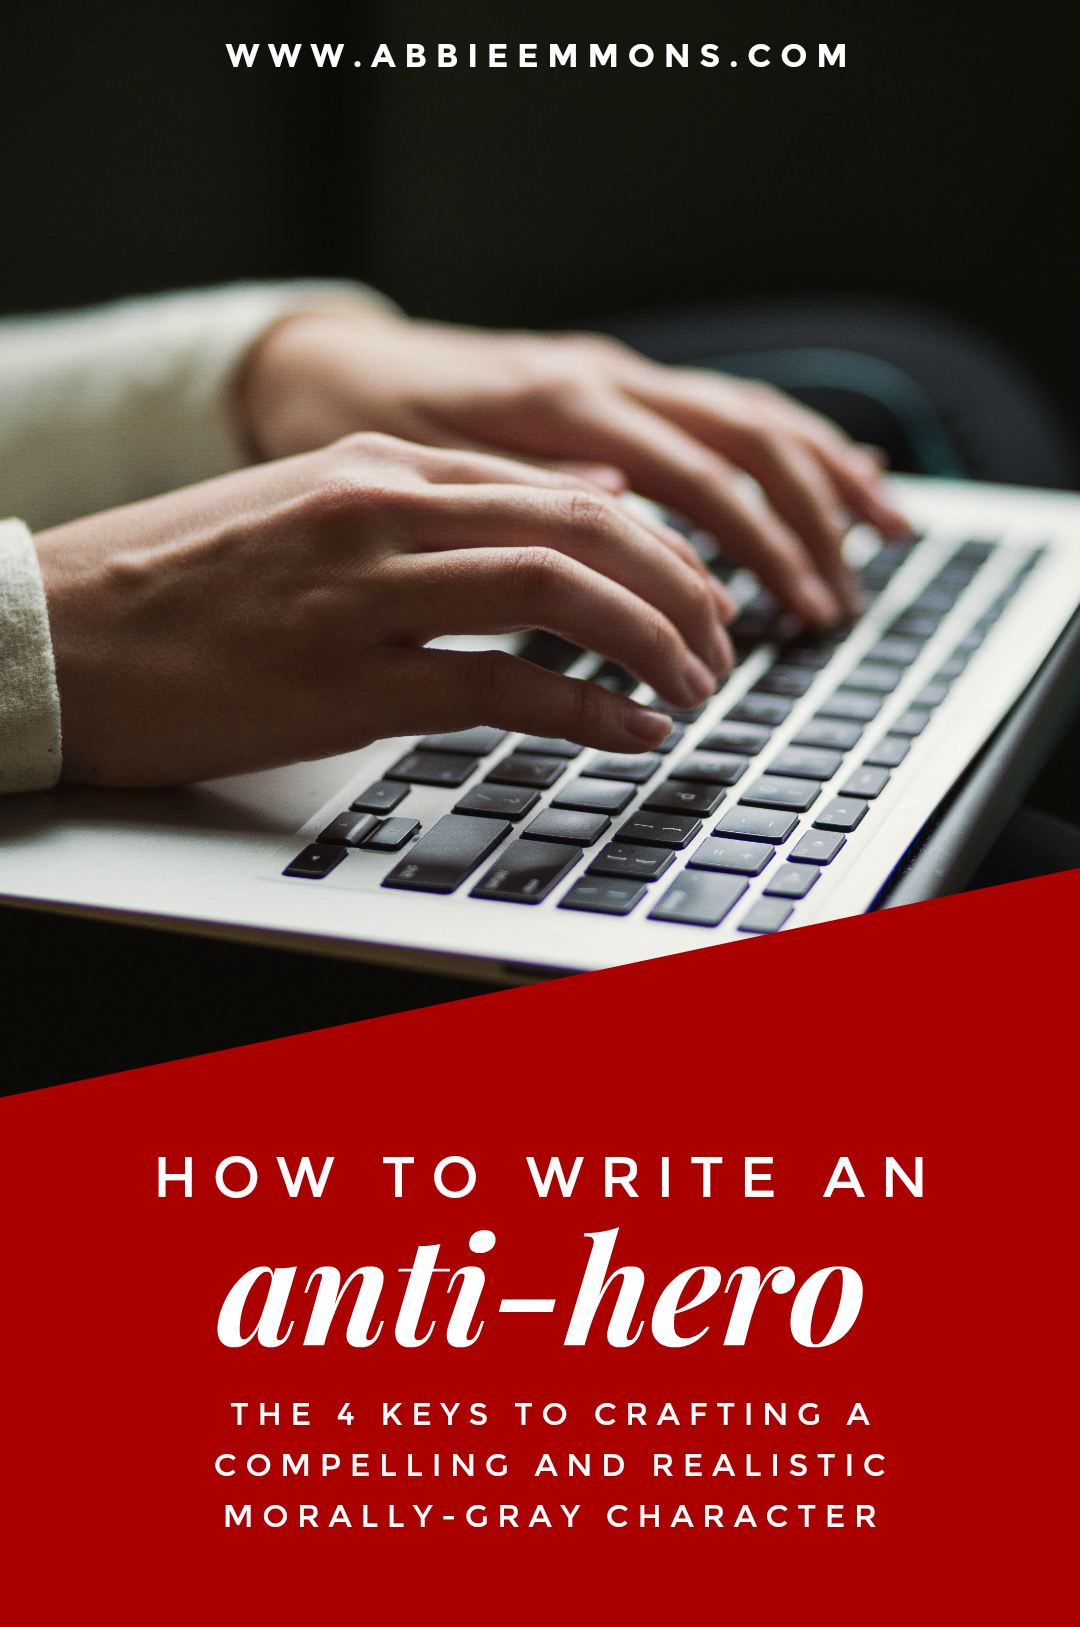 Abbie Emmons - How to Write an Anti-Hero: 24 Keys to a Compelling